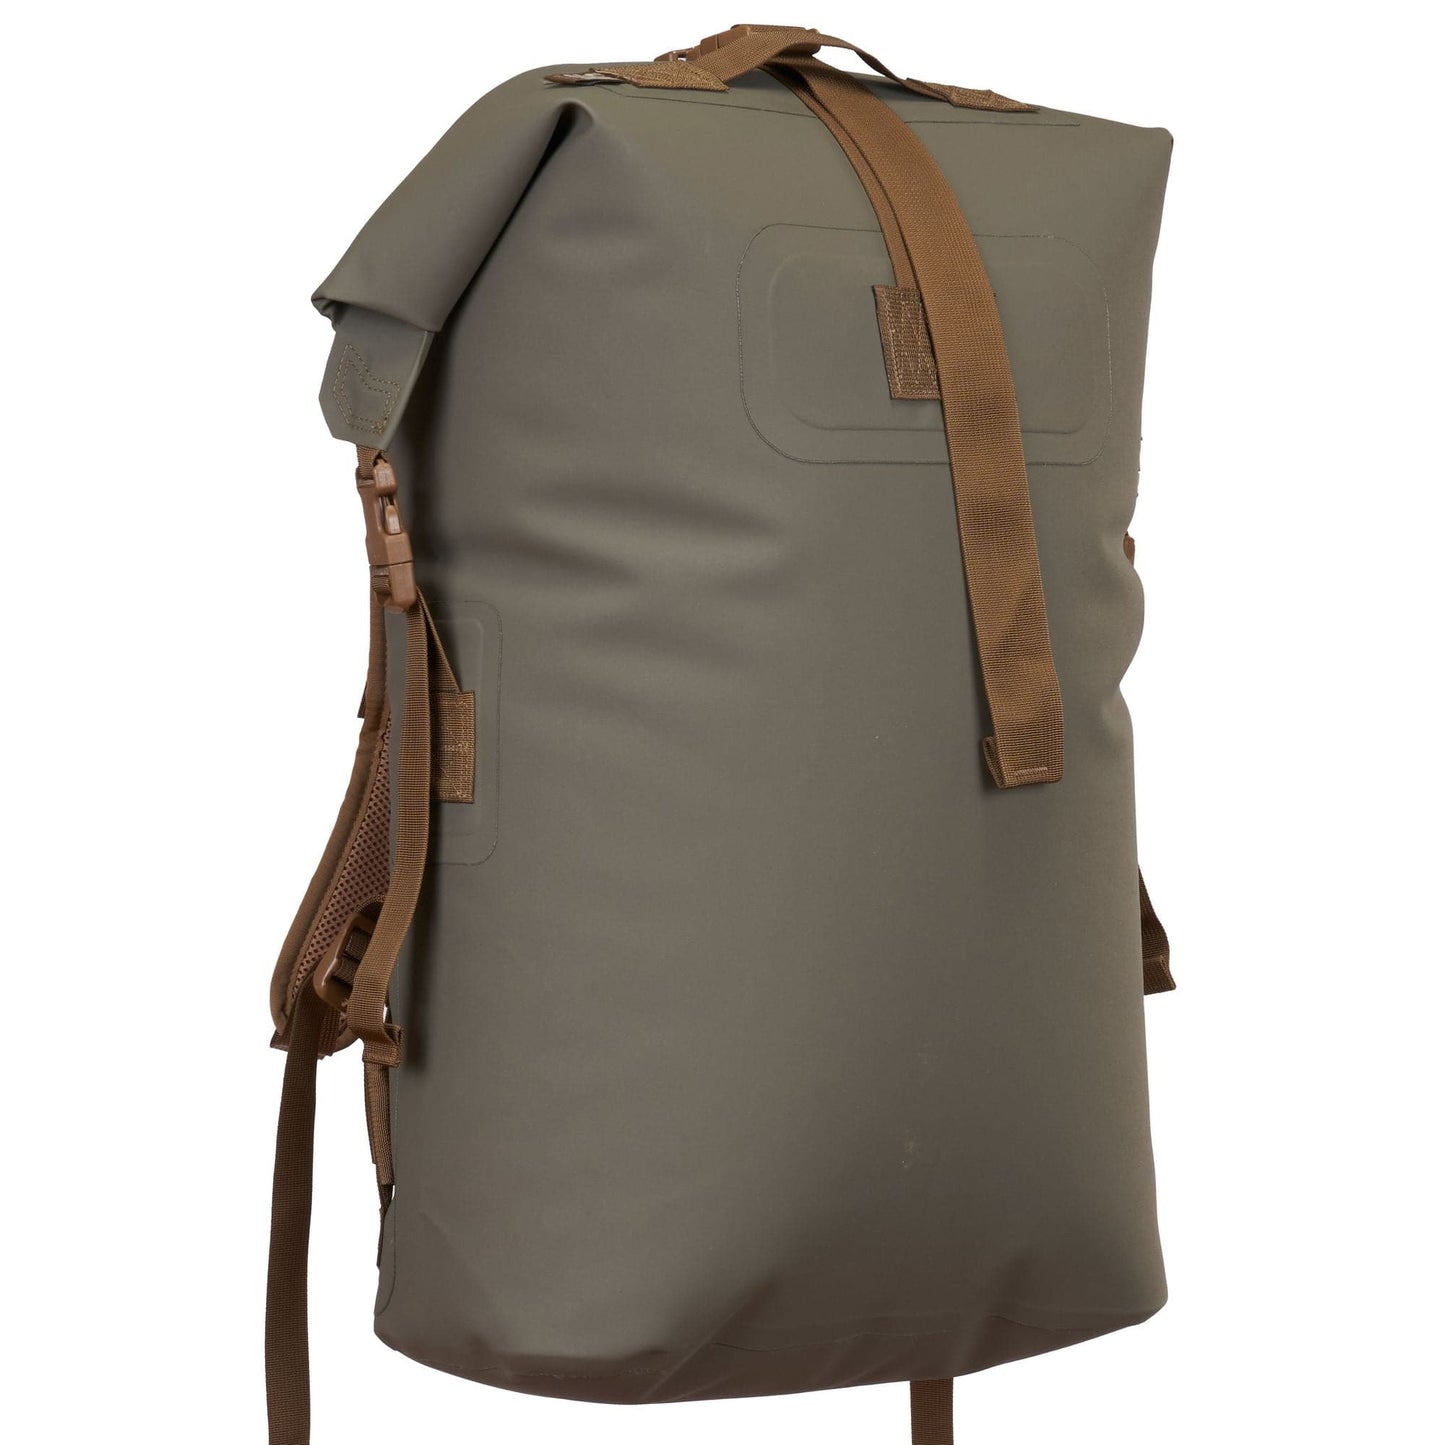 Featuring the Animas Drypack dry bag manufactured by Watershed shown here from one angle.